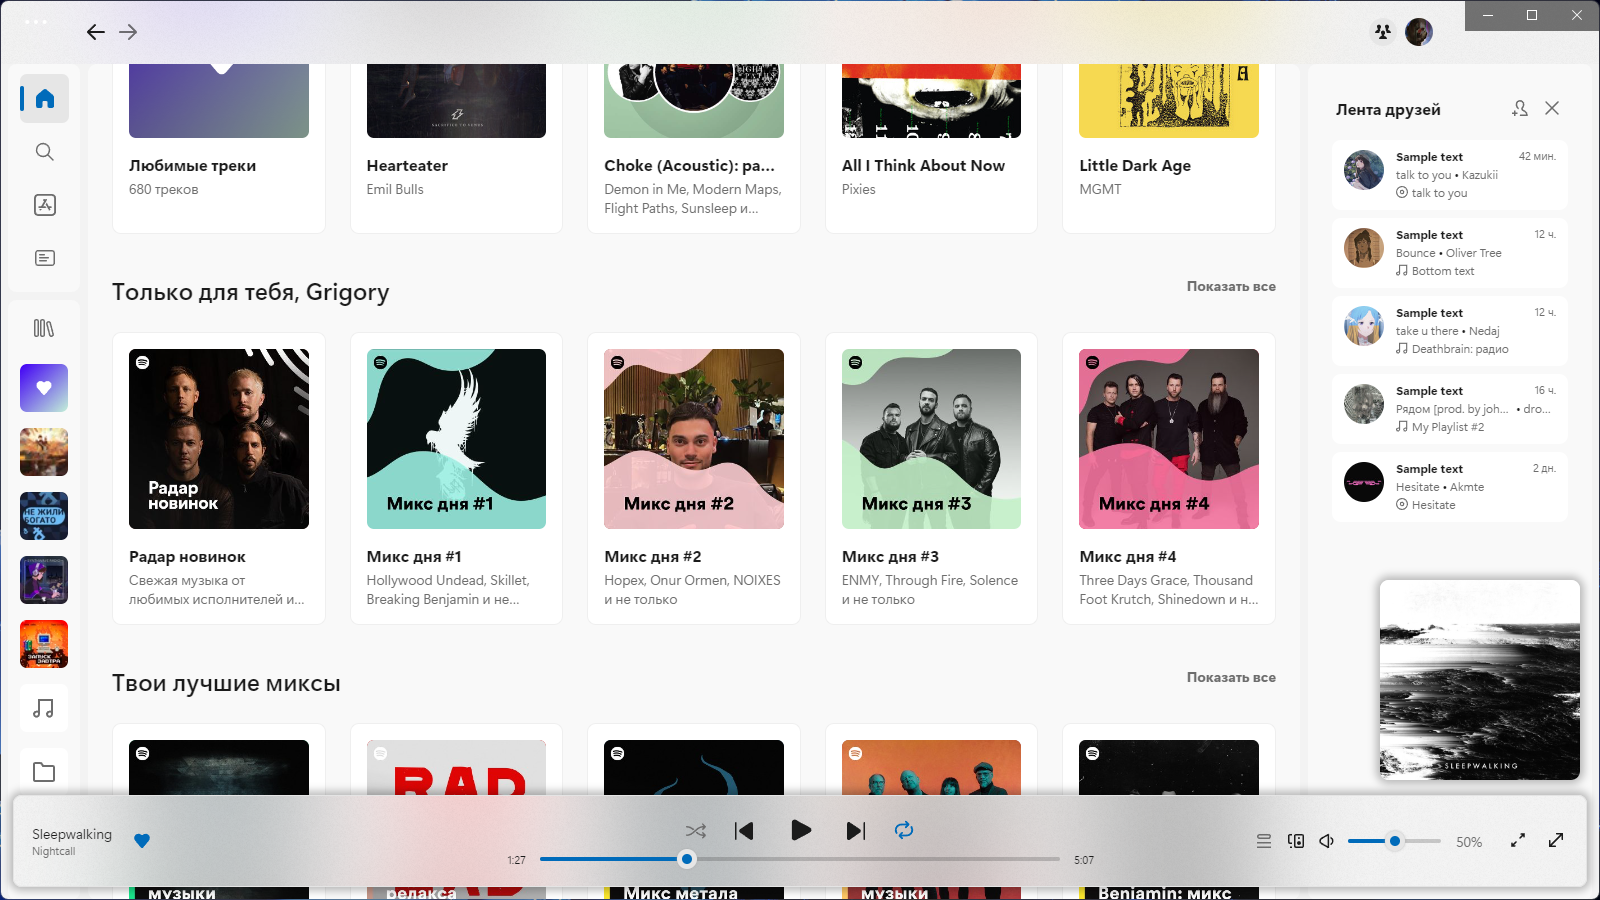 GitHub - daleysoftware/spotify-tiles: Tiles lets you to view the album art  of your favorite Spotify artists in full-screen, tiled across your browser.